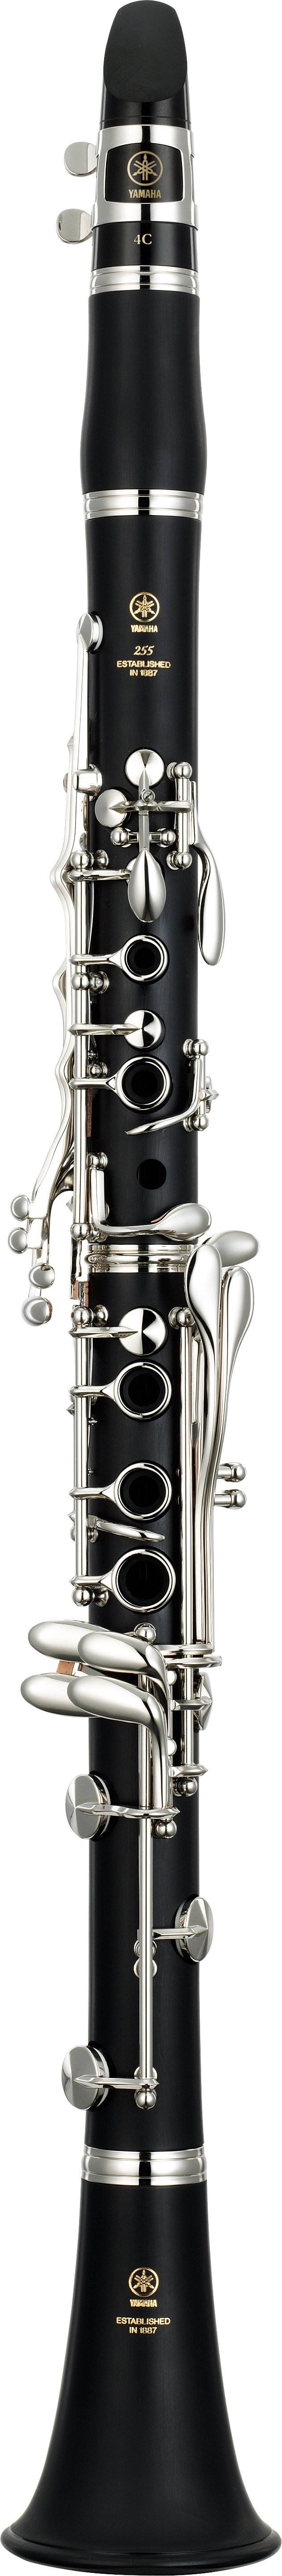 YCL-255 - Overview - Clarinets - Brass & Woodwinds - Musical 